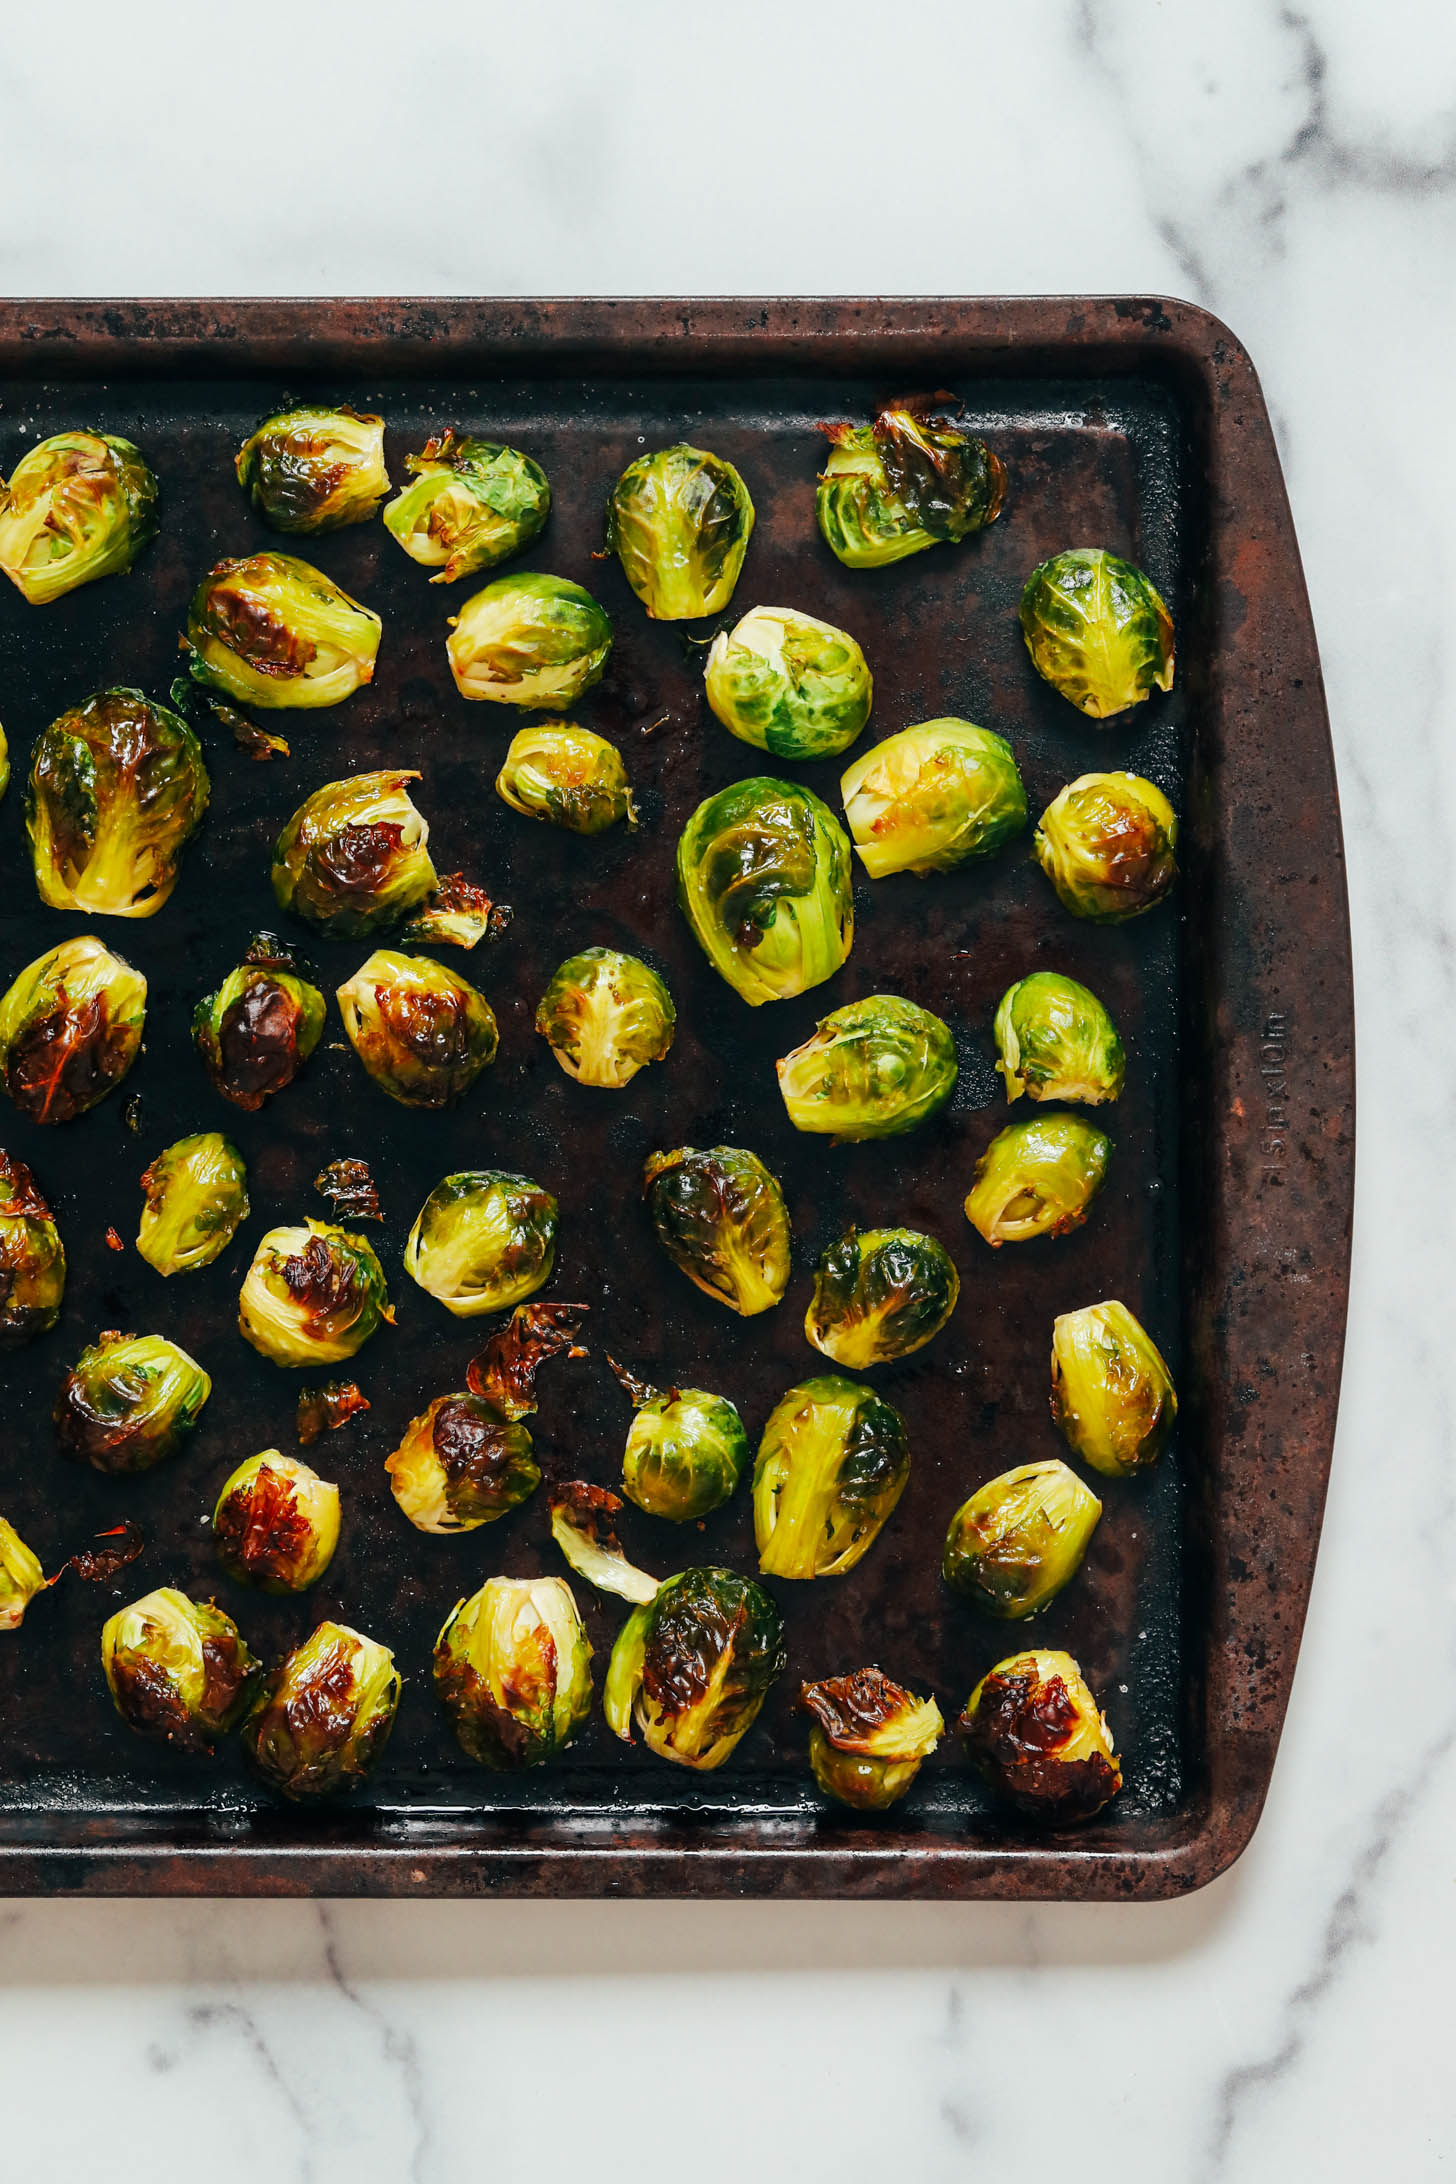 Crispy roasted Brussels sprouts on a baking sheet